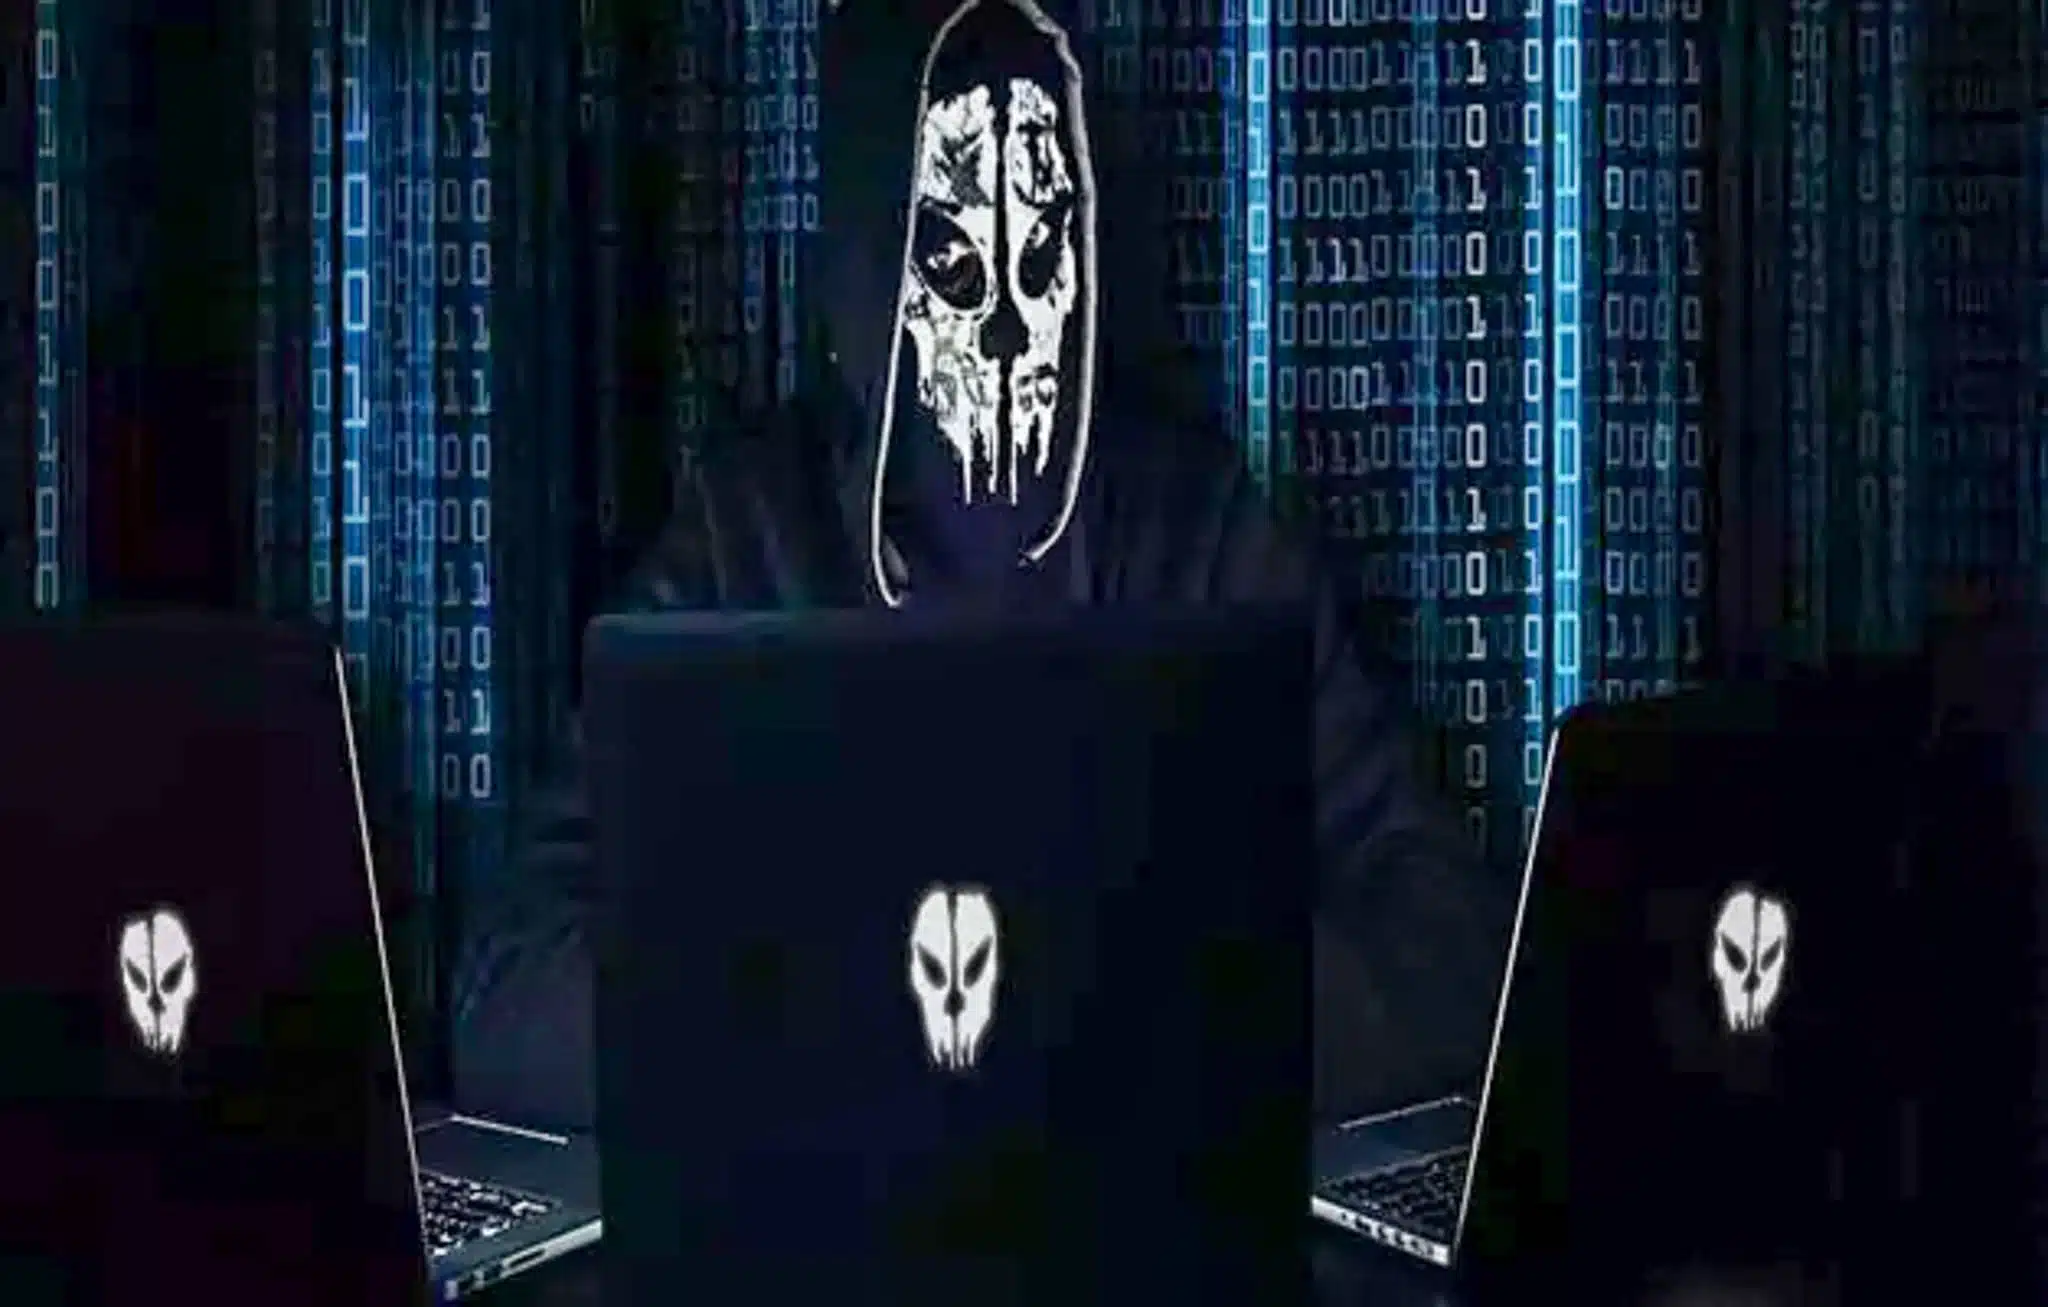 A skeleton in front of 3 computers